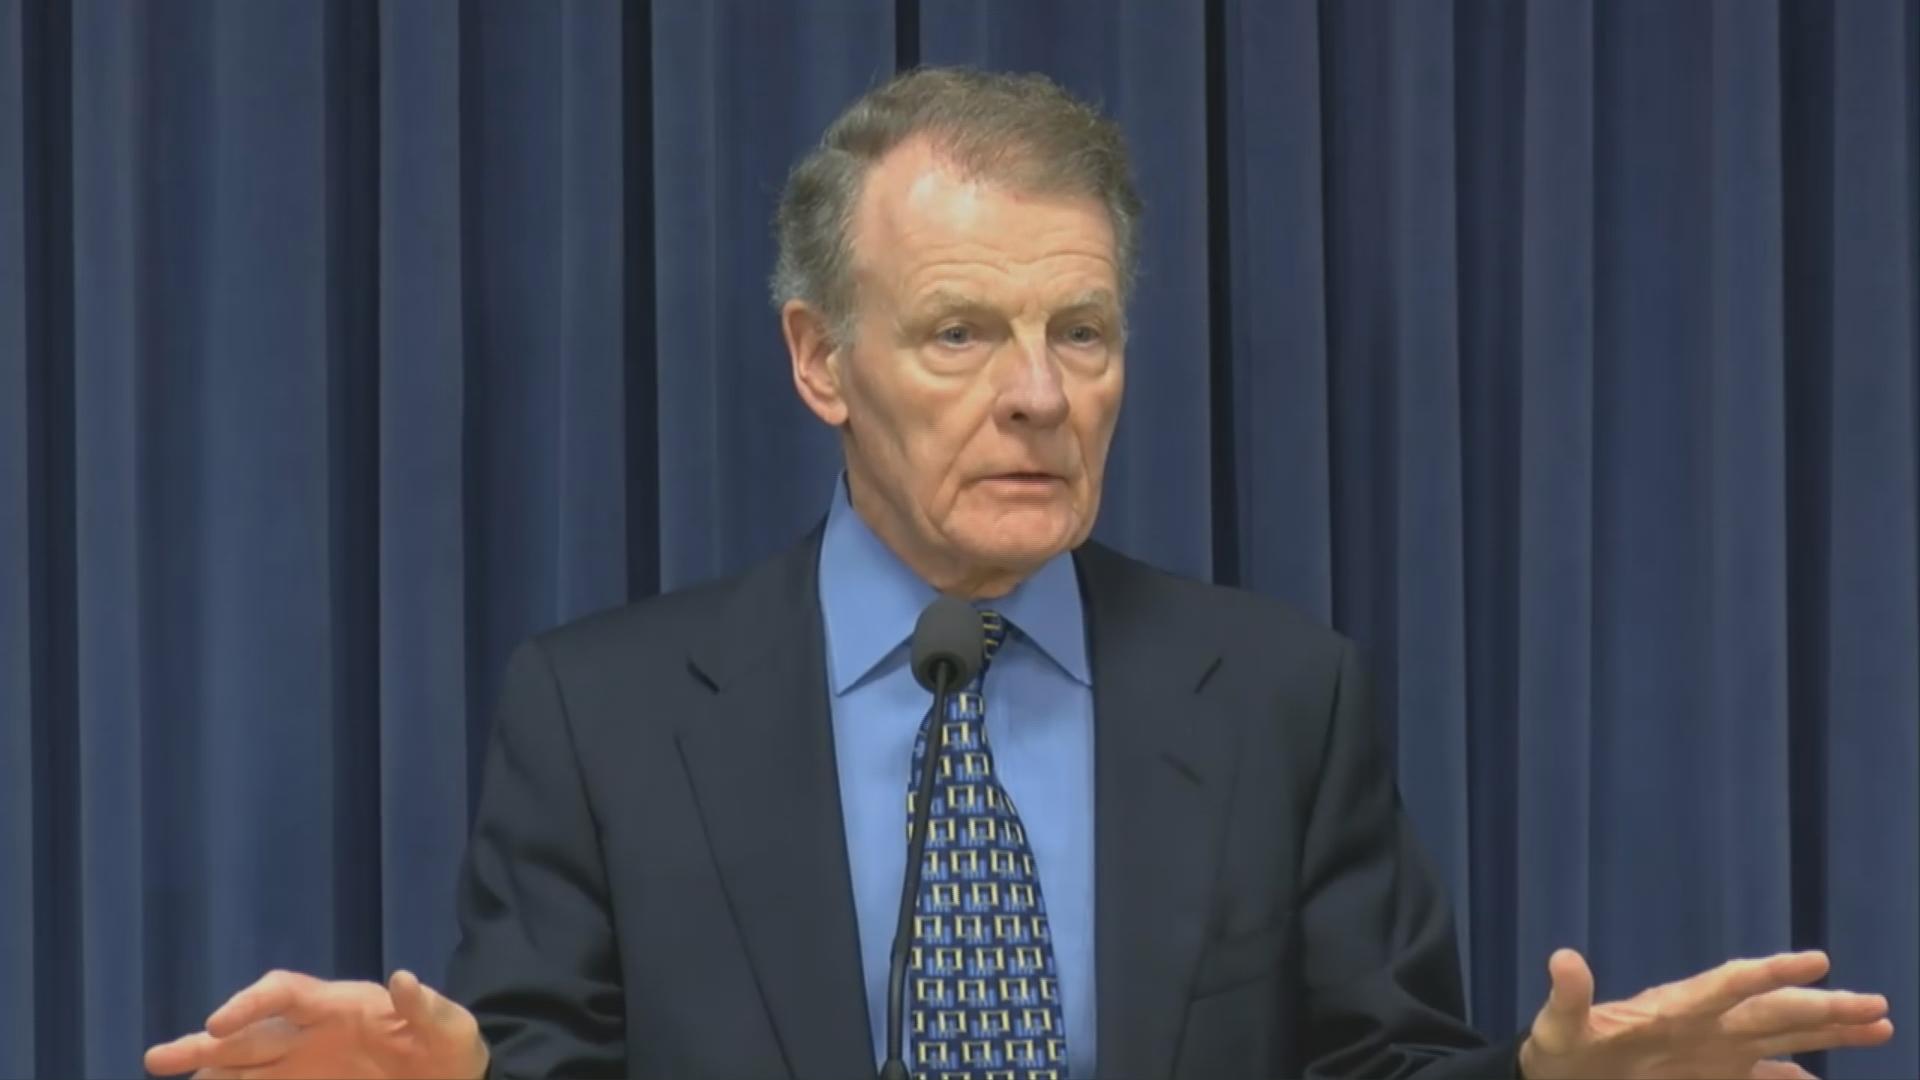 House Speaker Michael Madigan talks about education funding on Aug. 16, 2017. “We're not going to walk away from Senate Bill 1,” he said.